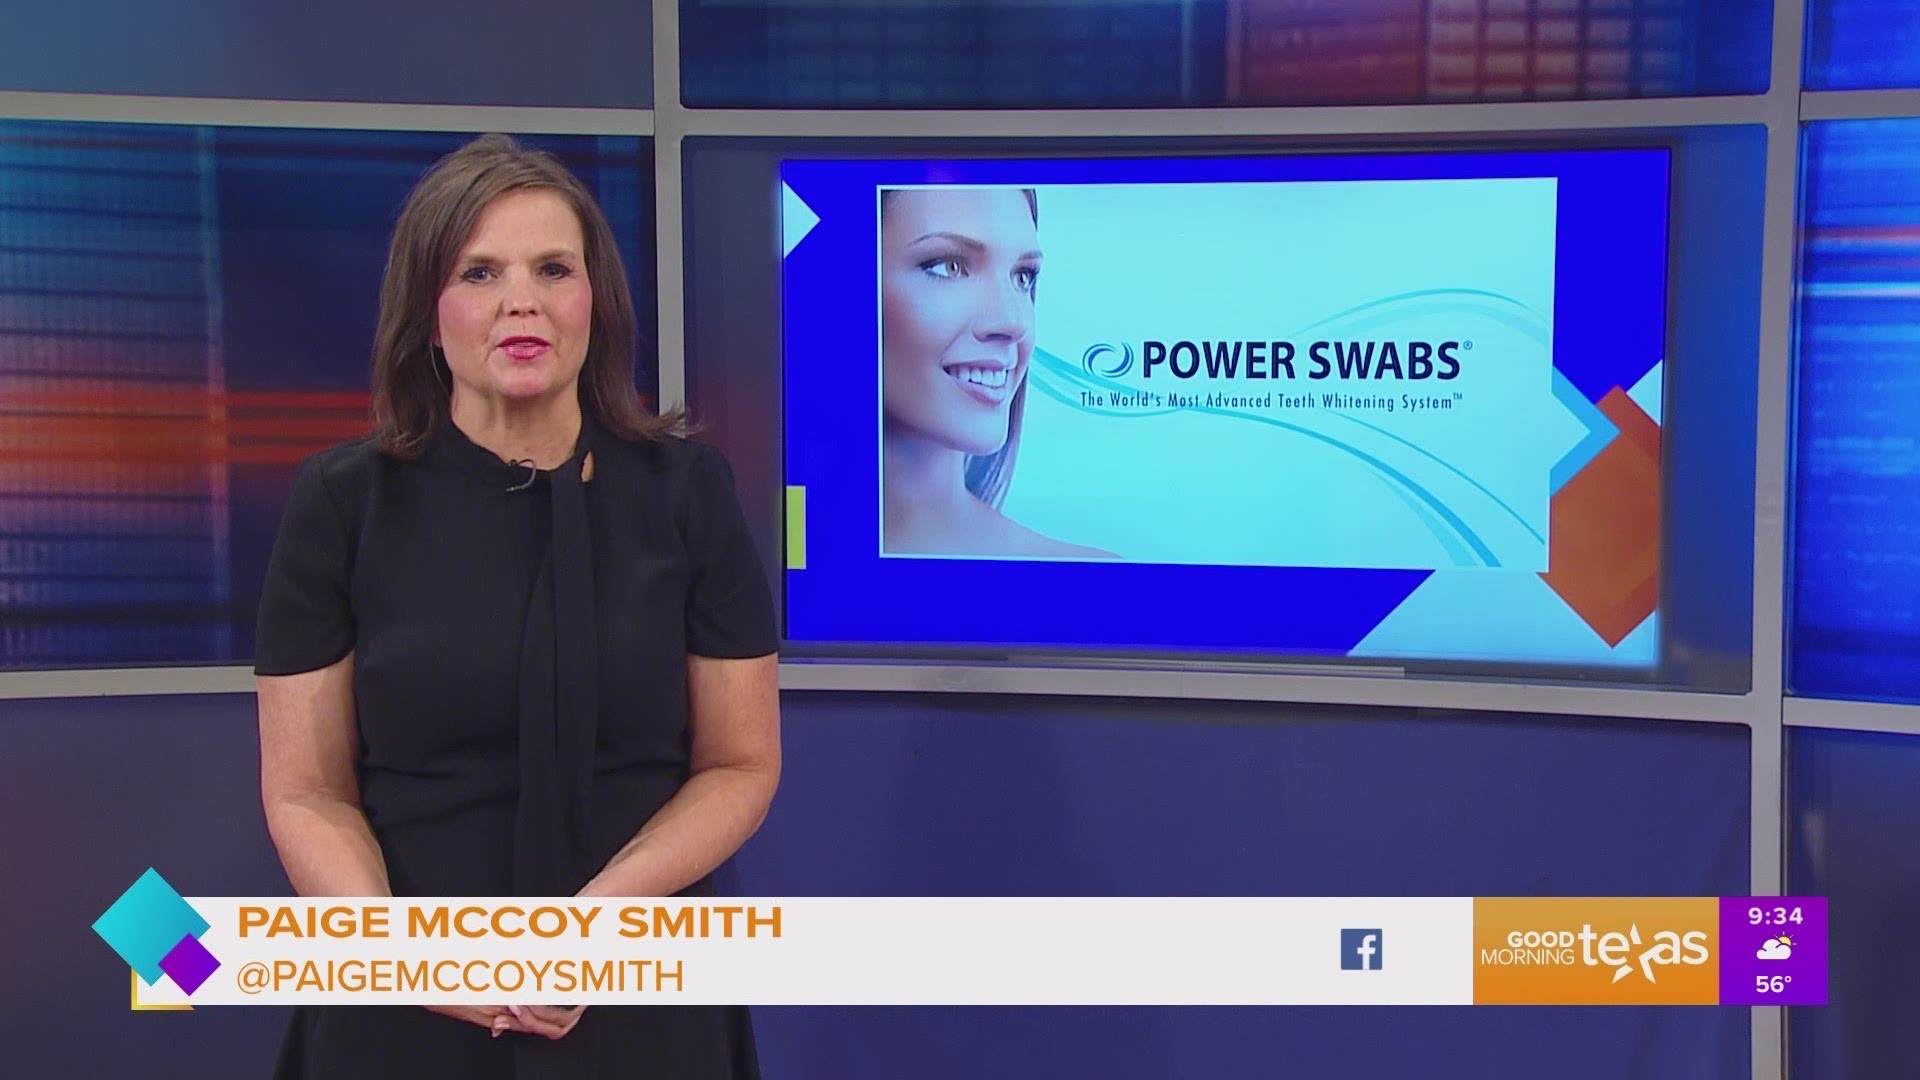 Segment sponsored by Sheer Science. Go to powerswabs.com or call 1.800.708.5112 for more information.